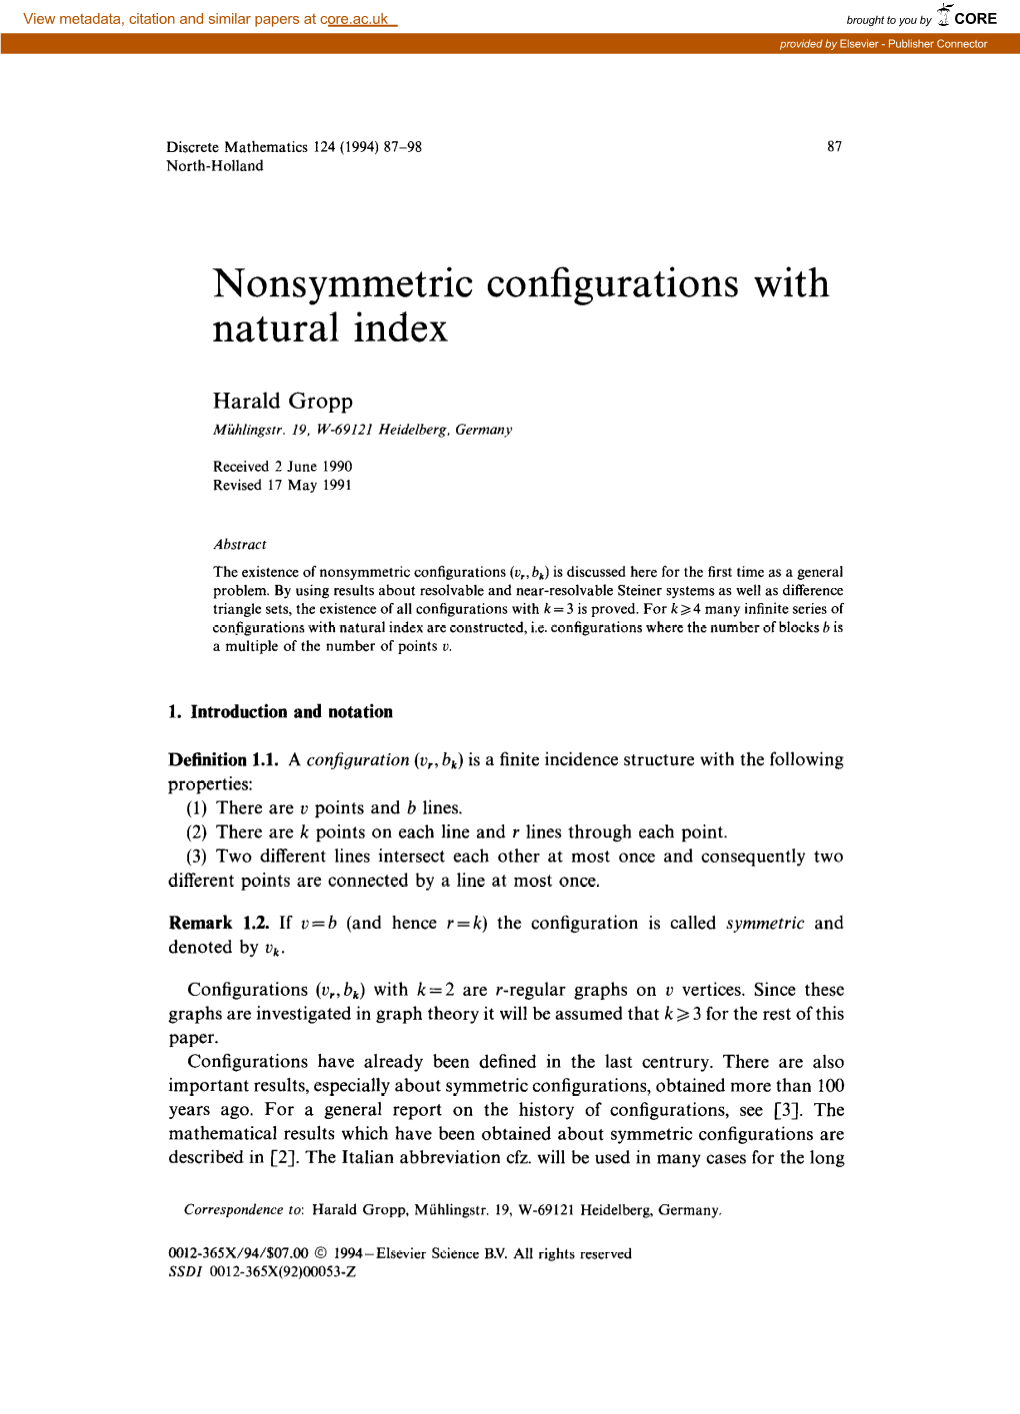 Nonsymmetric Configurations with Natural Index